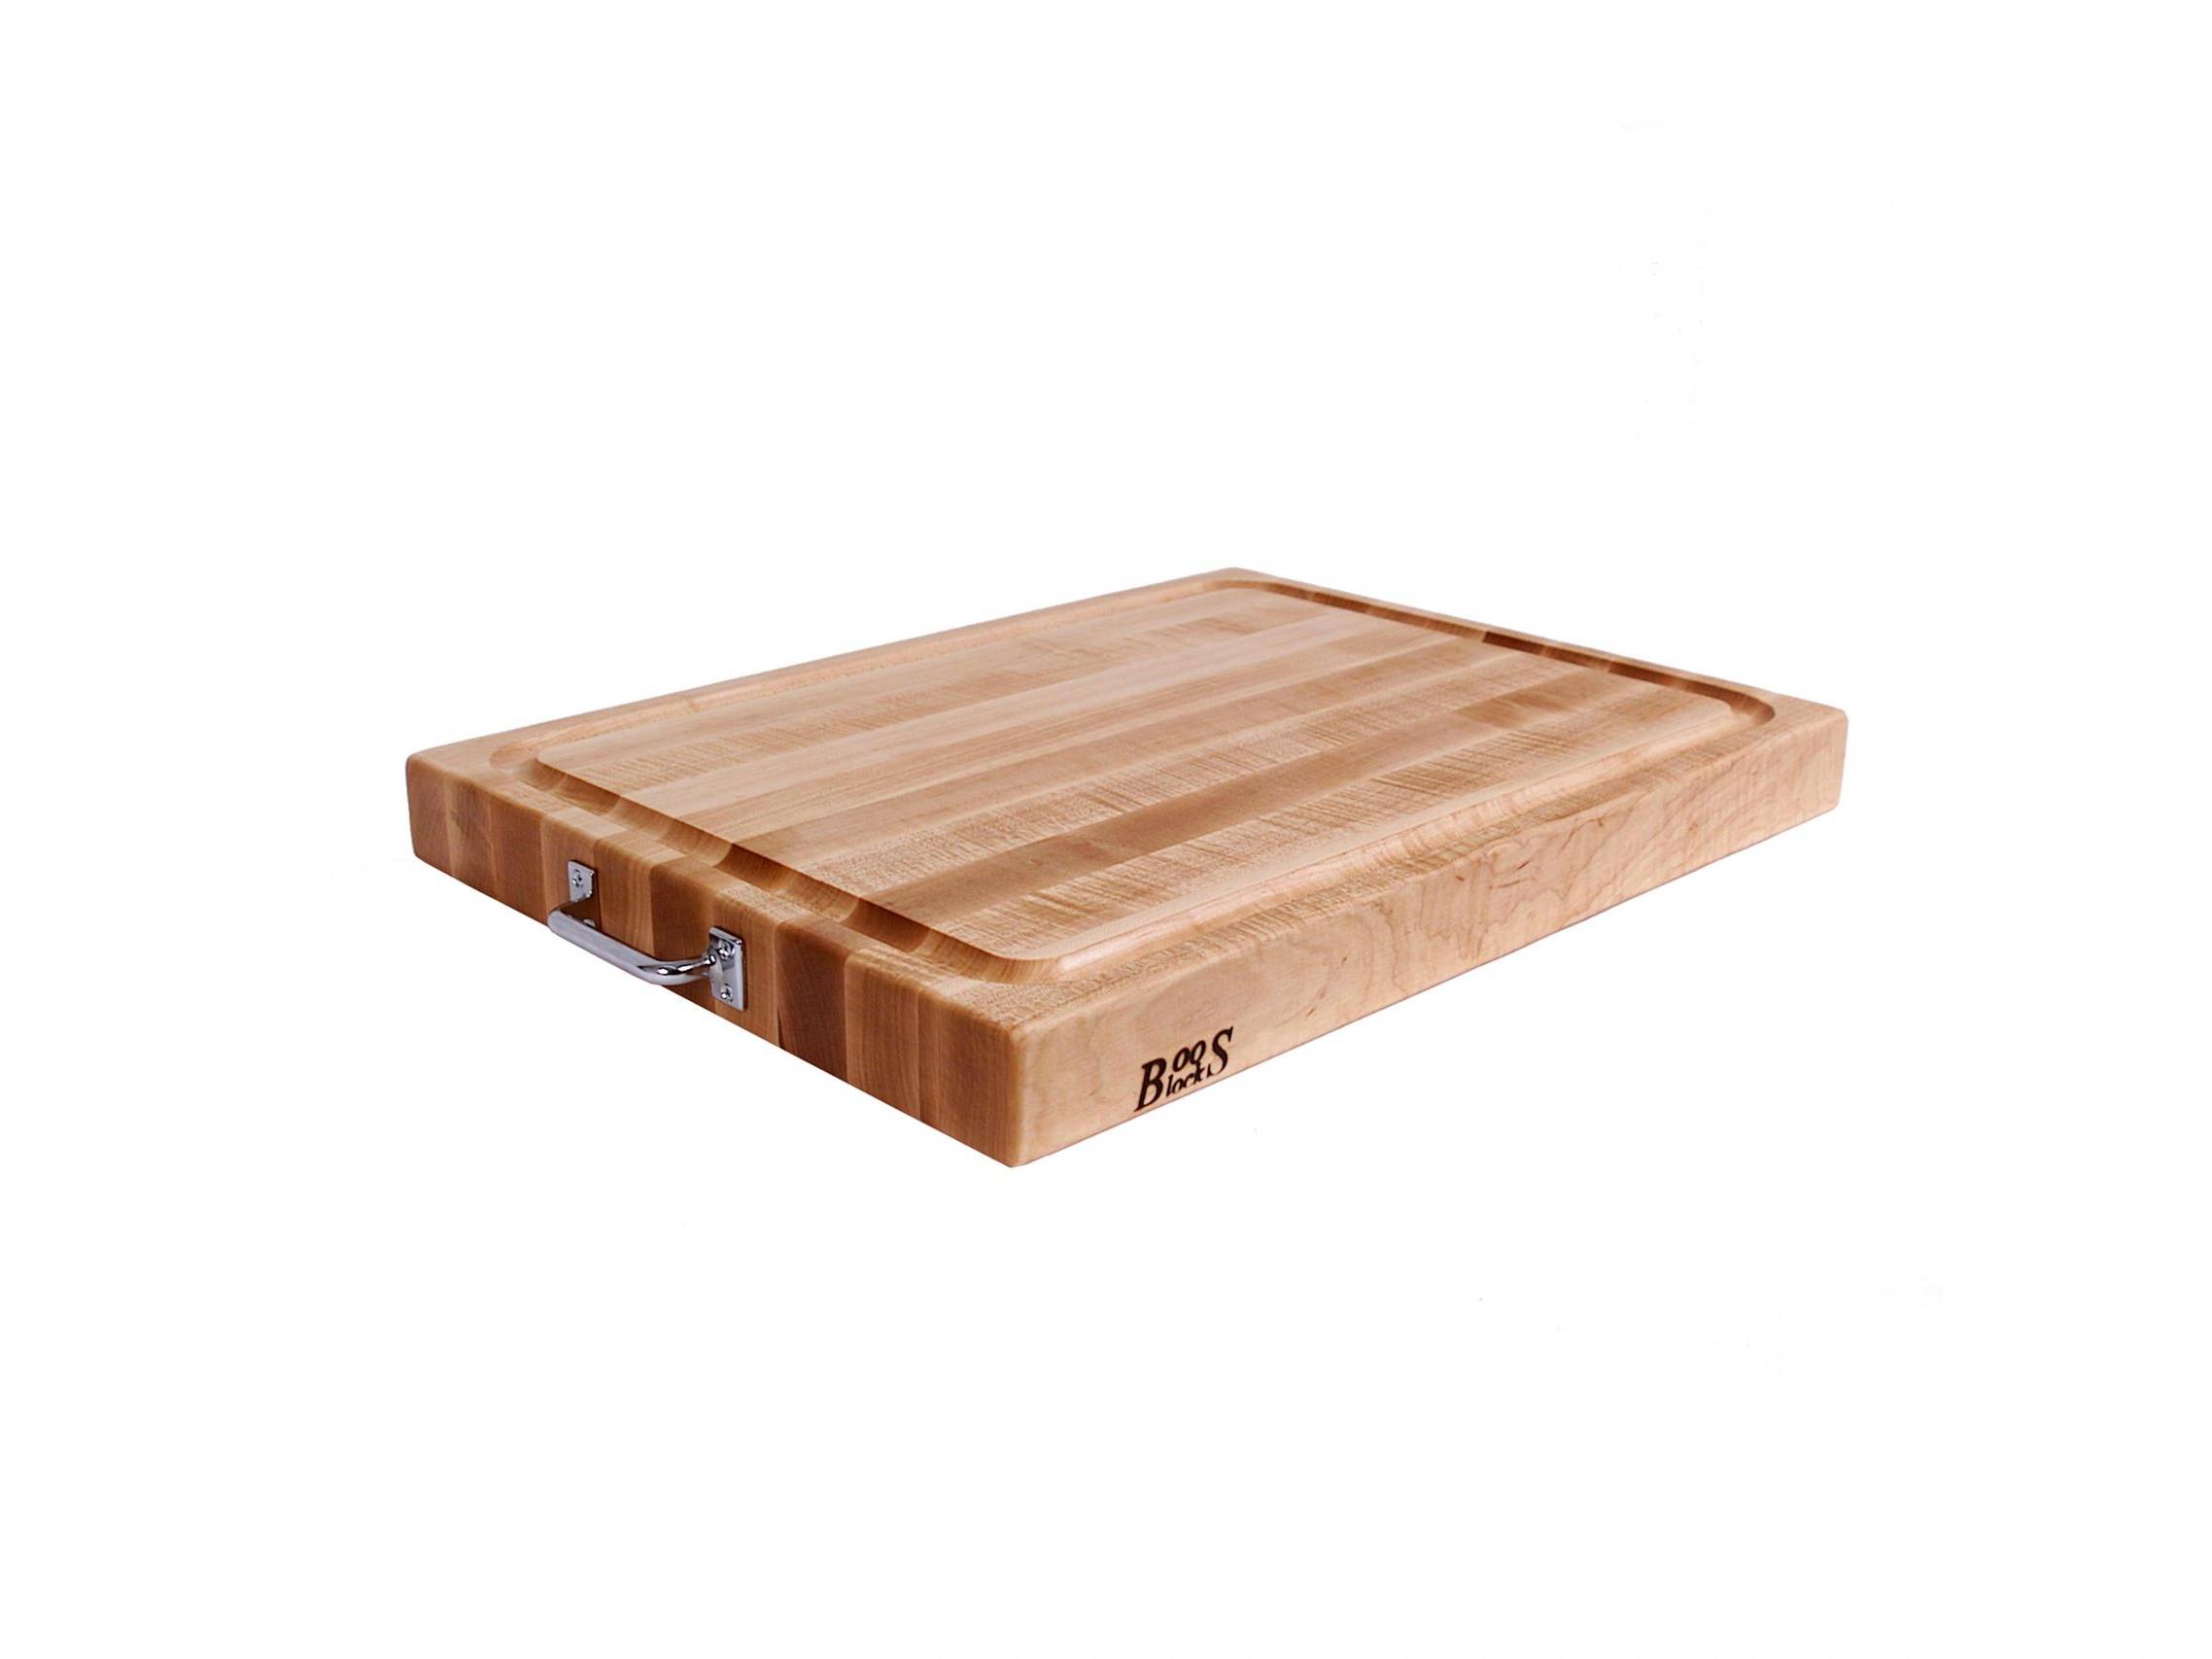 Prep-N-Serve Hard Maple Cutting Board with Juice Groove, Stainless Steel Handles; Can Be Used on Both Sides 63